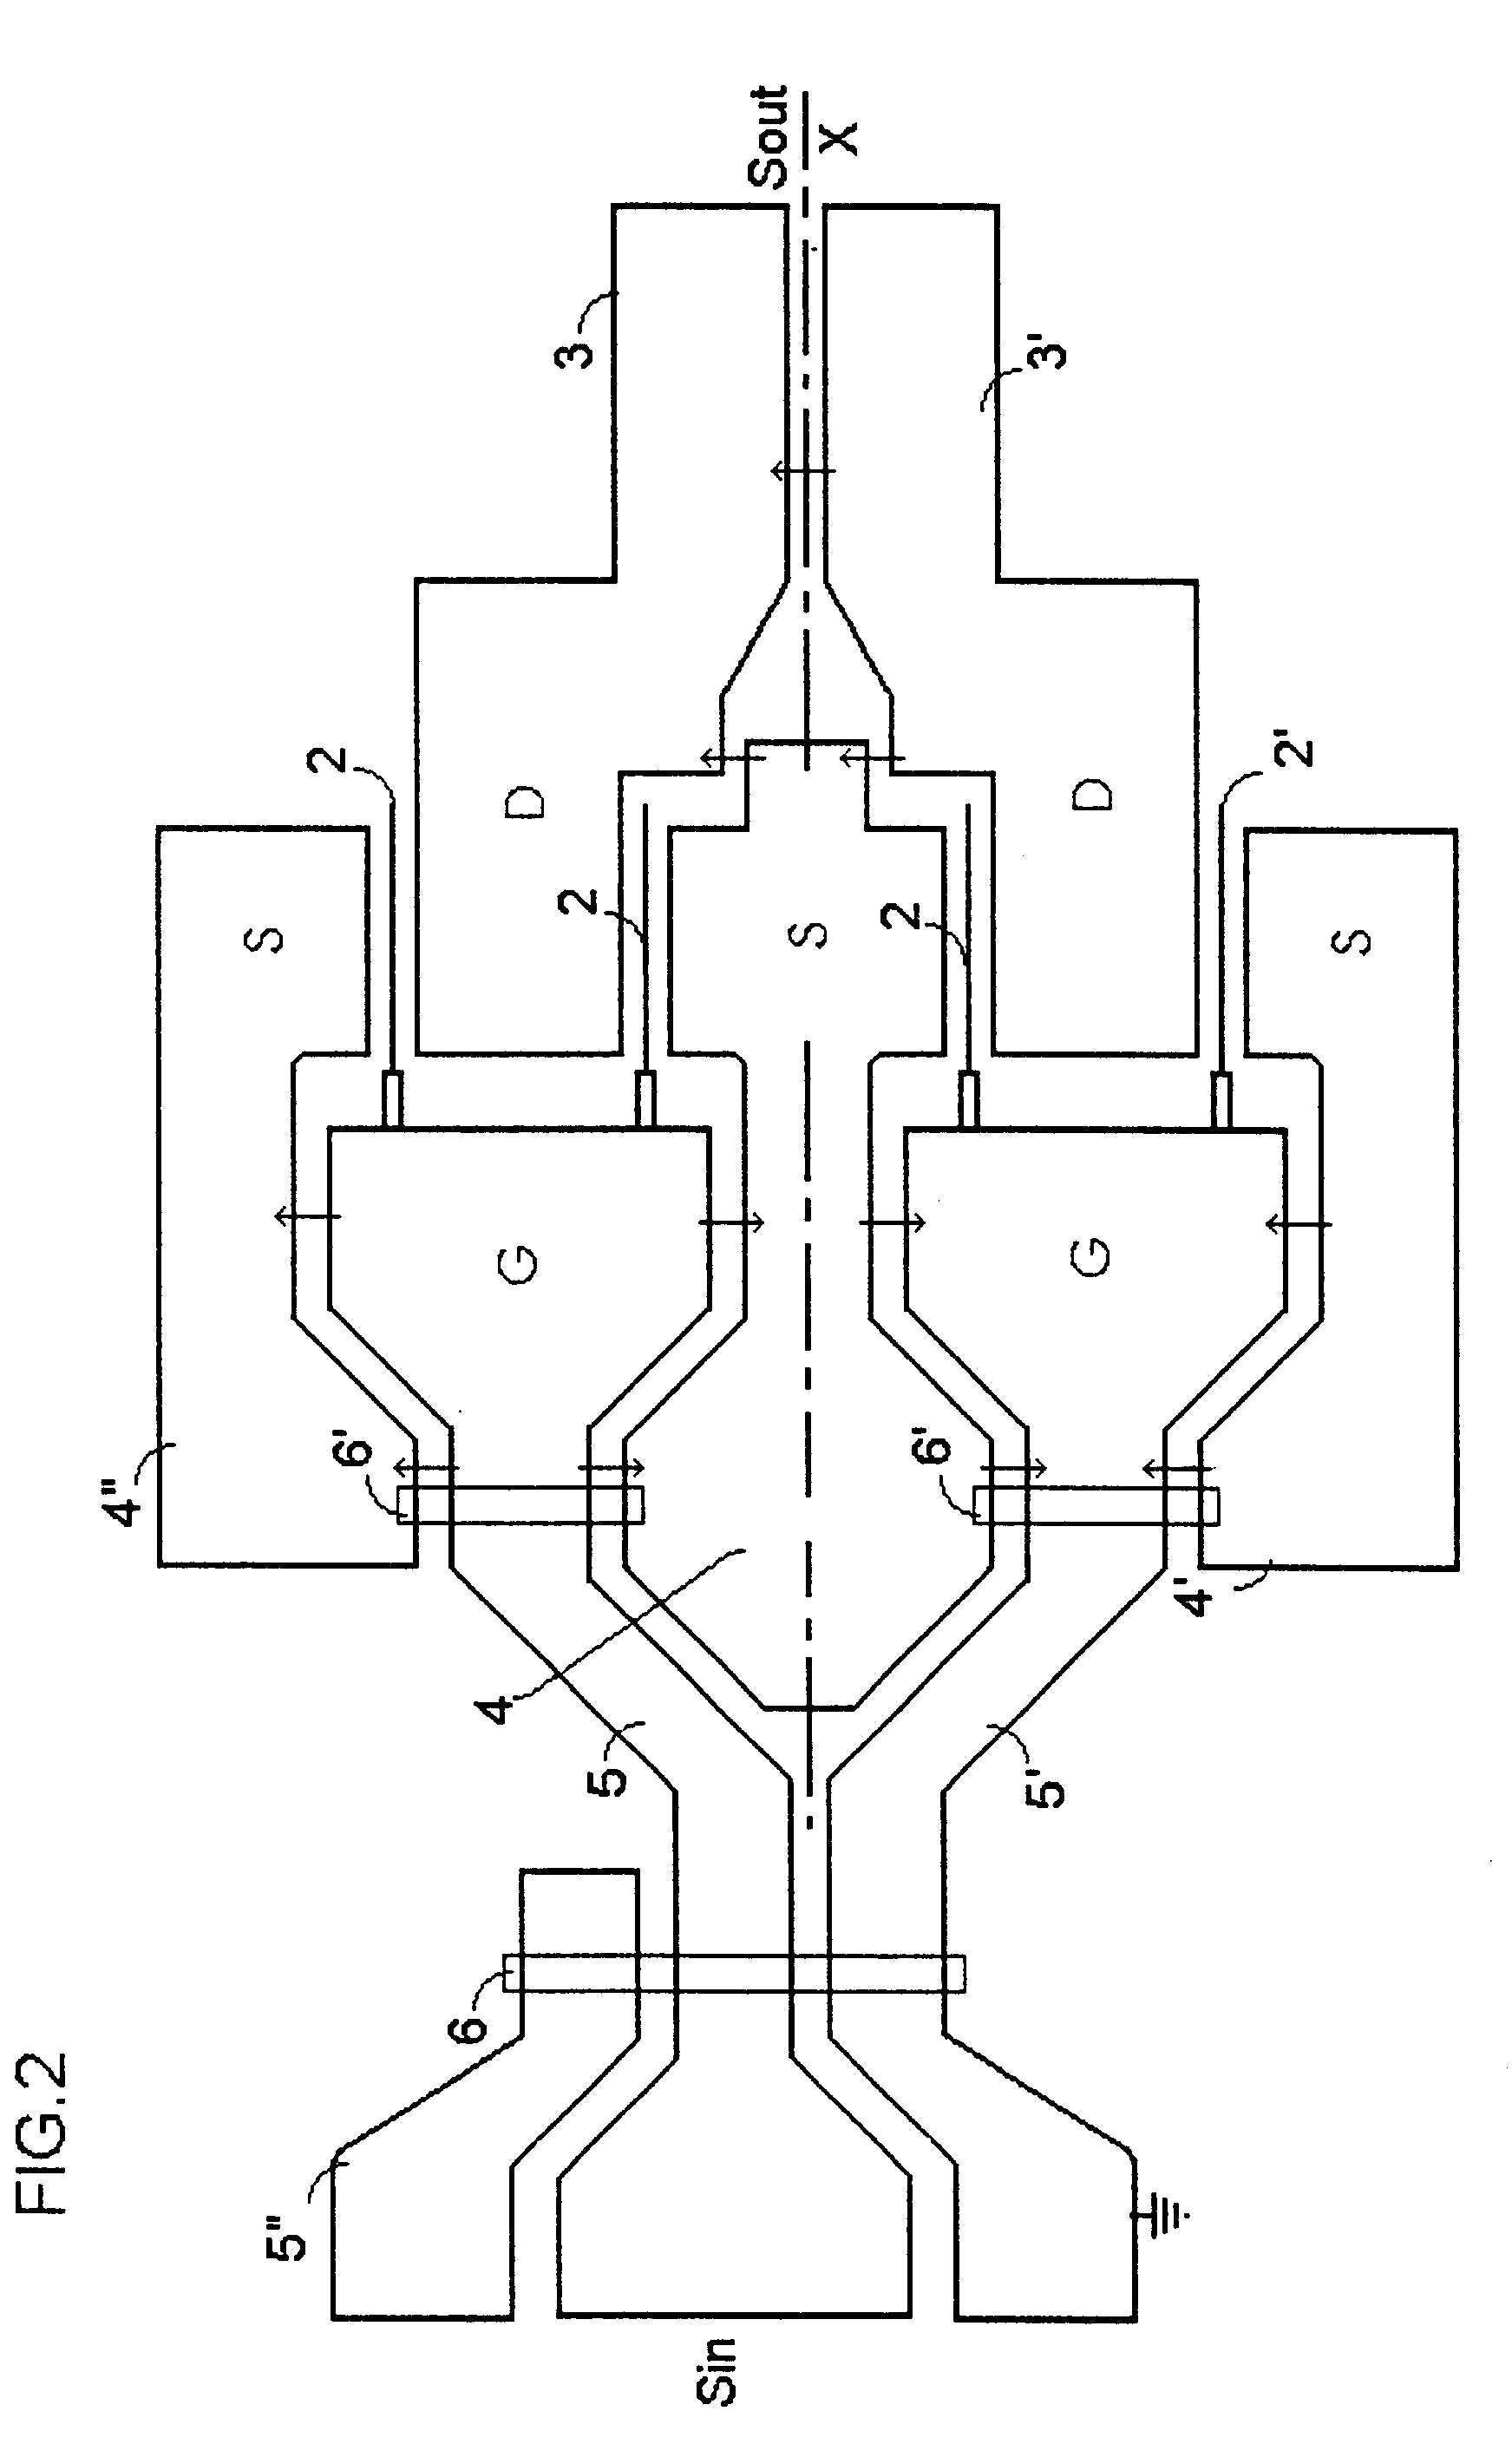 Microwave coupler for a monolithic integrated circuit